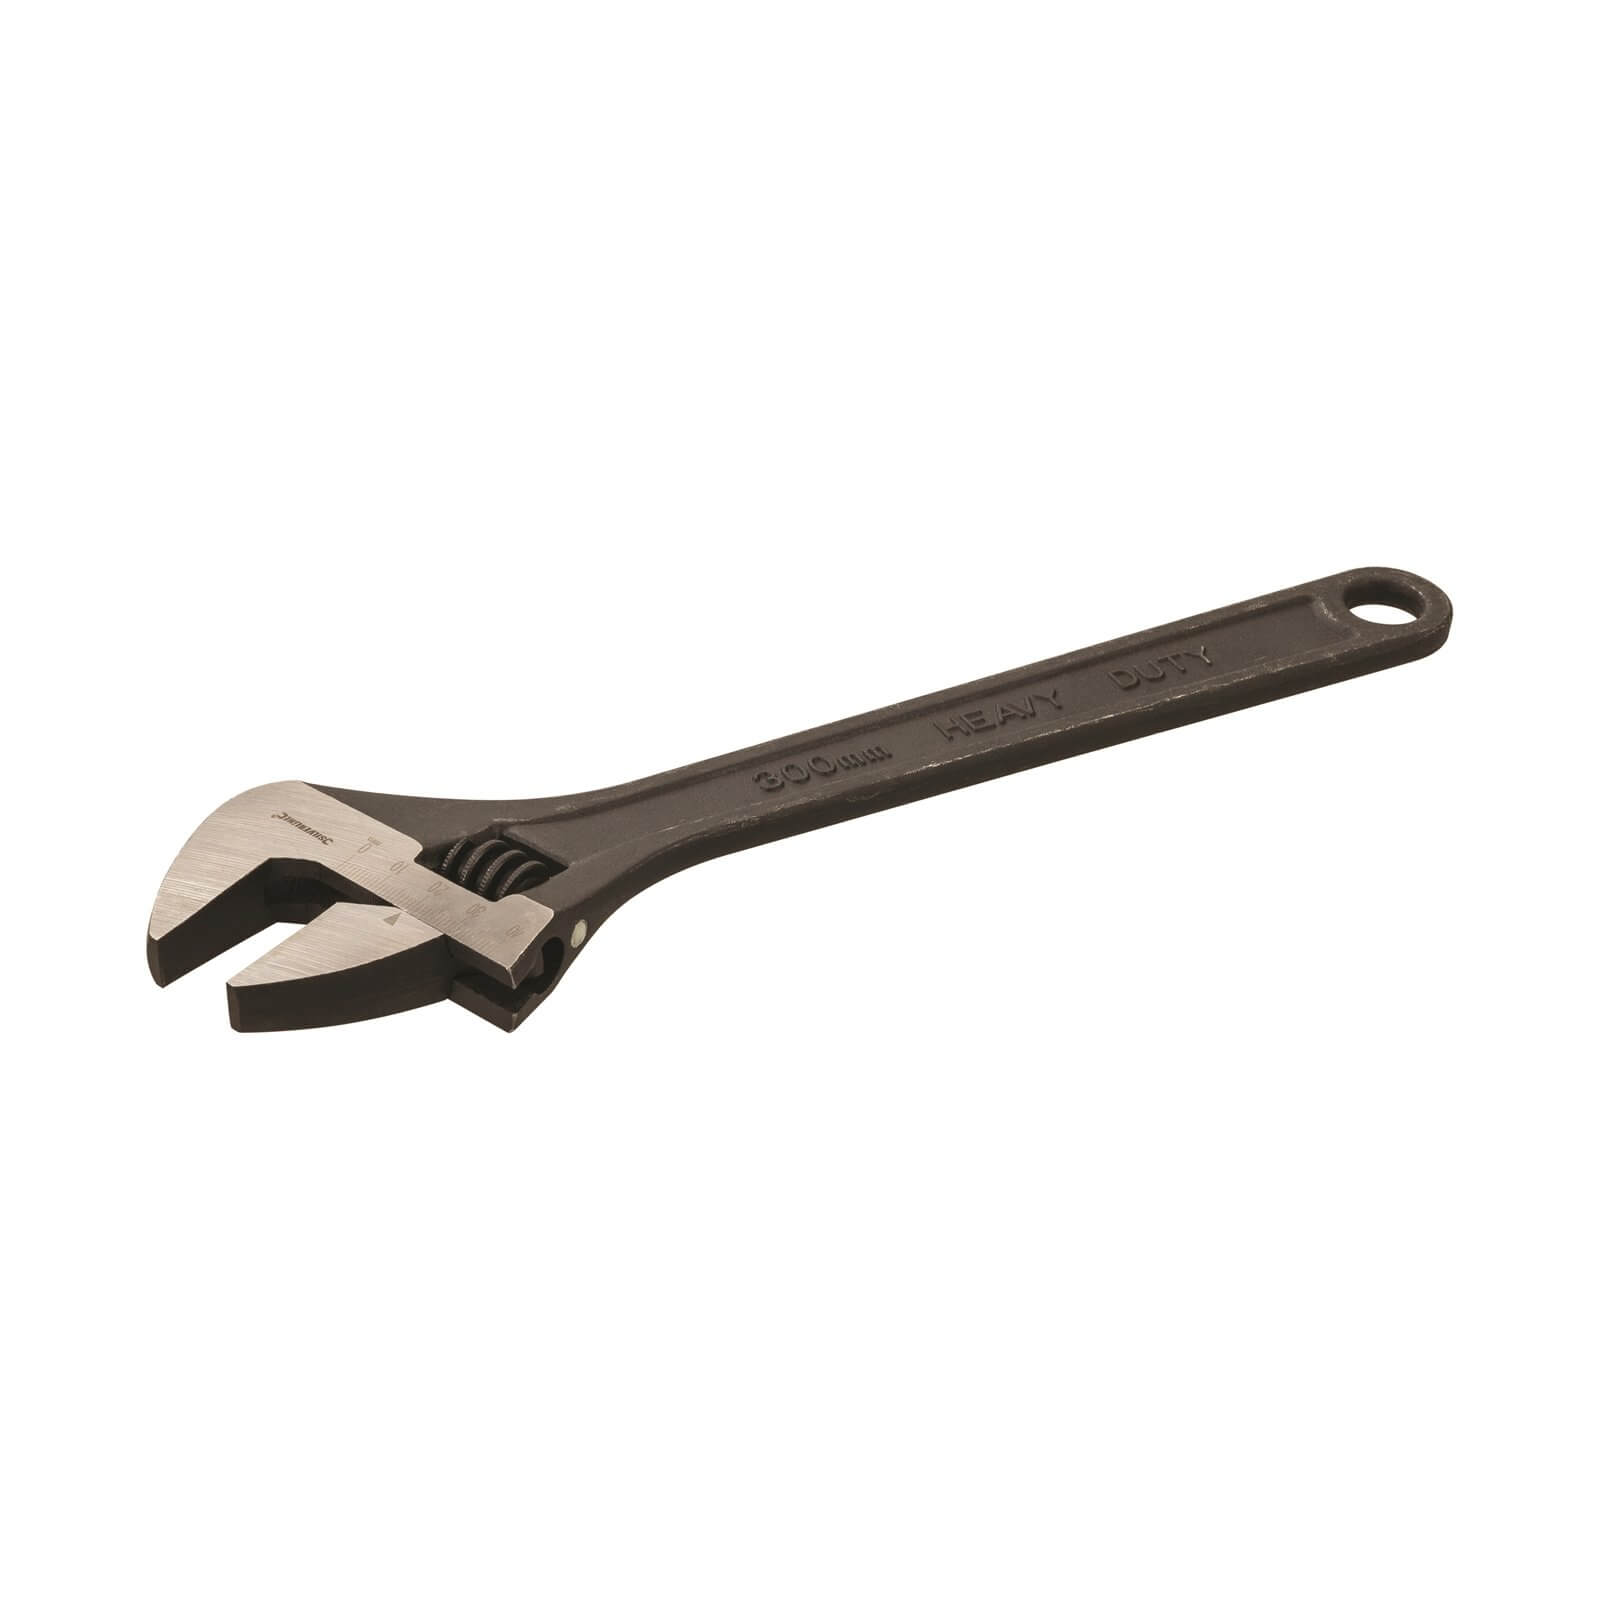 Photo of Silverline Expert Adjustable Wrench 250mm Jaw 27mm